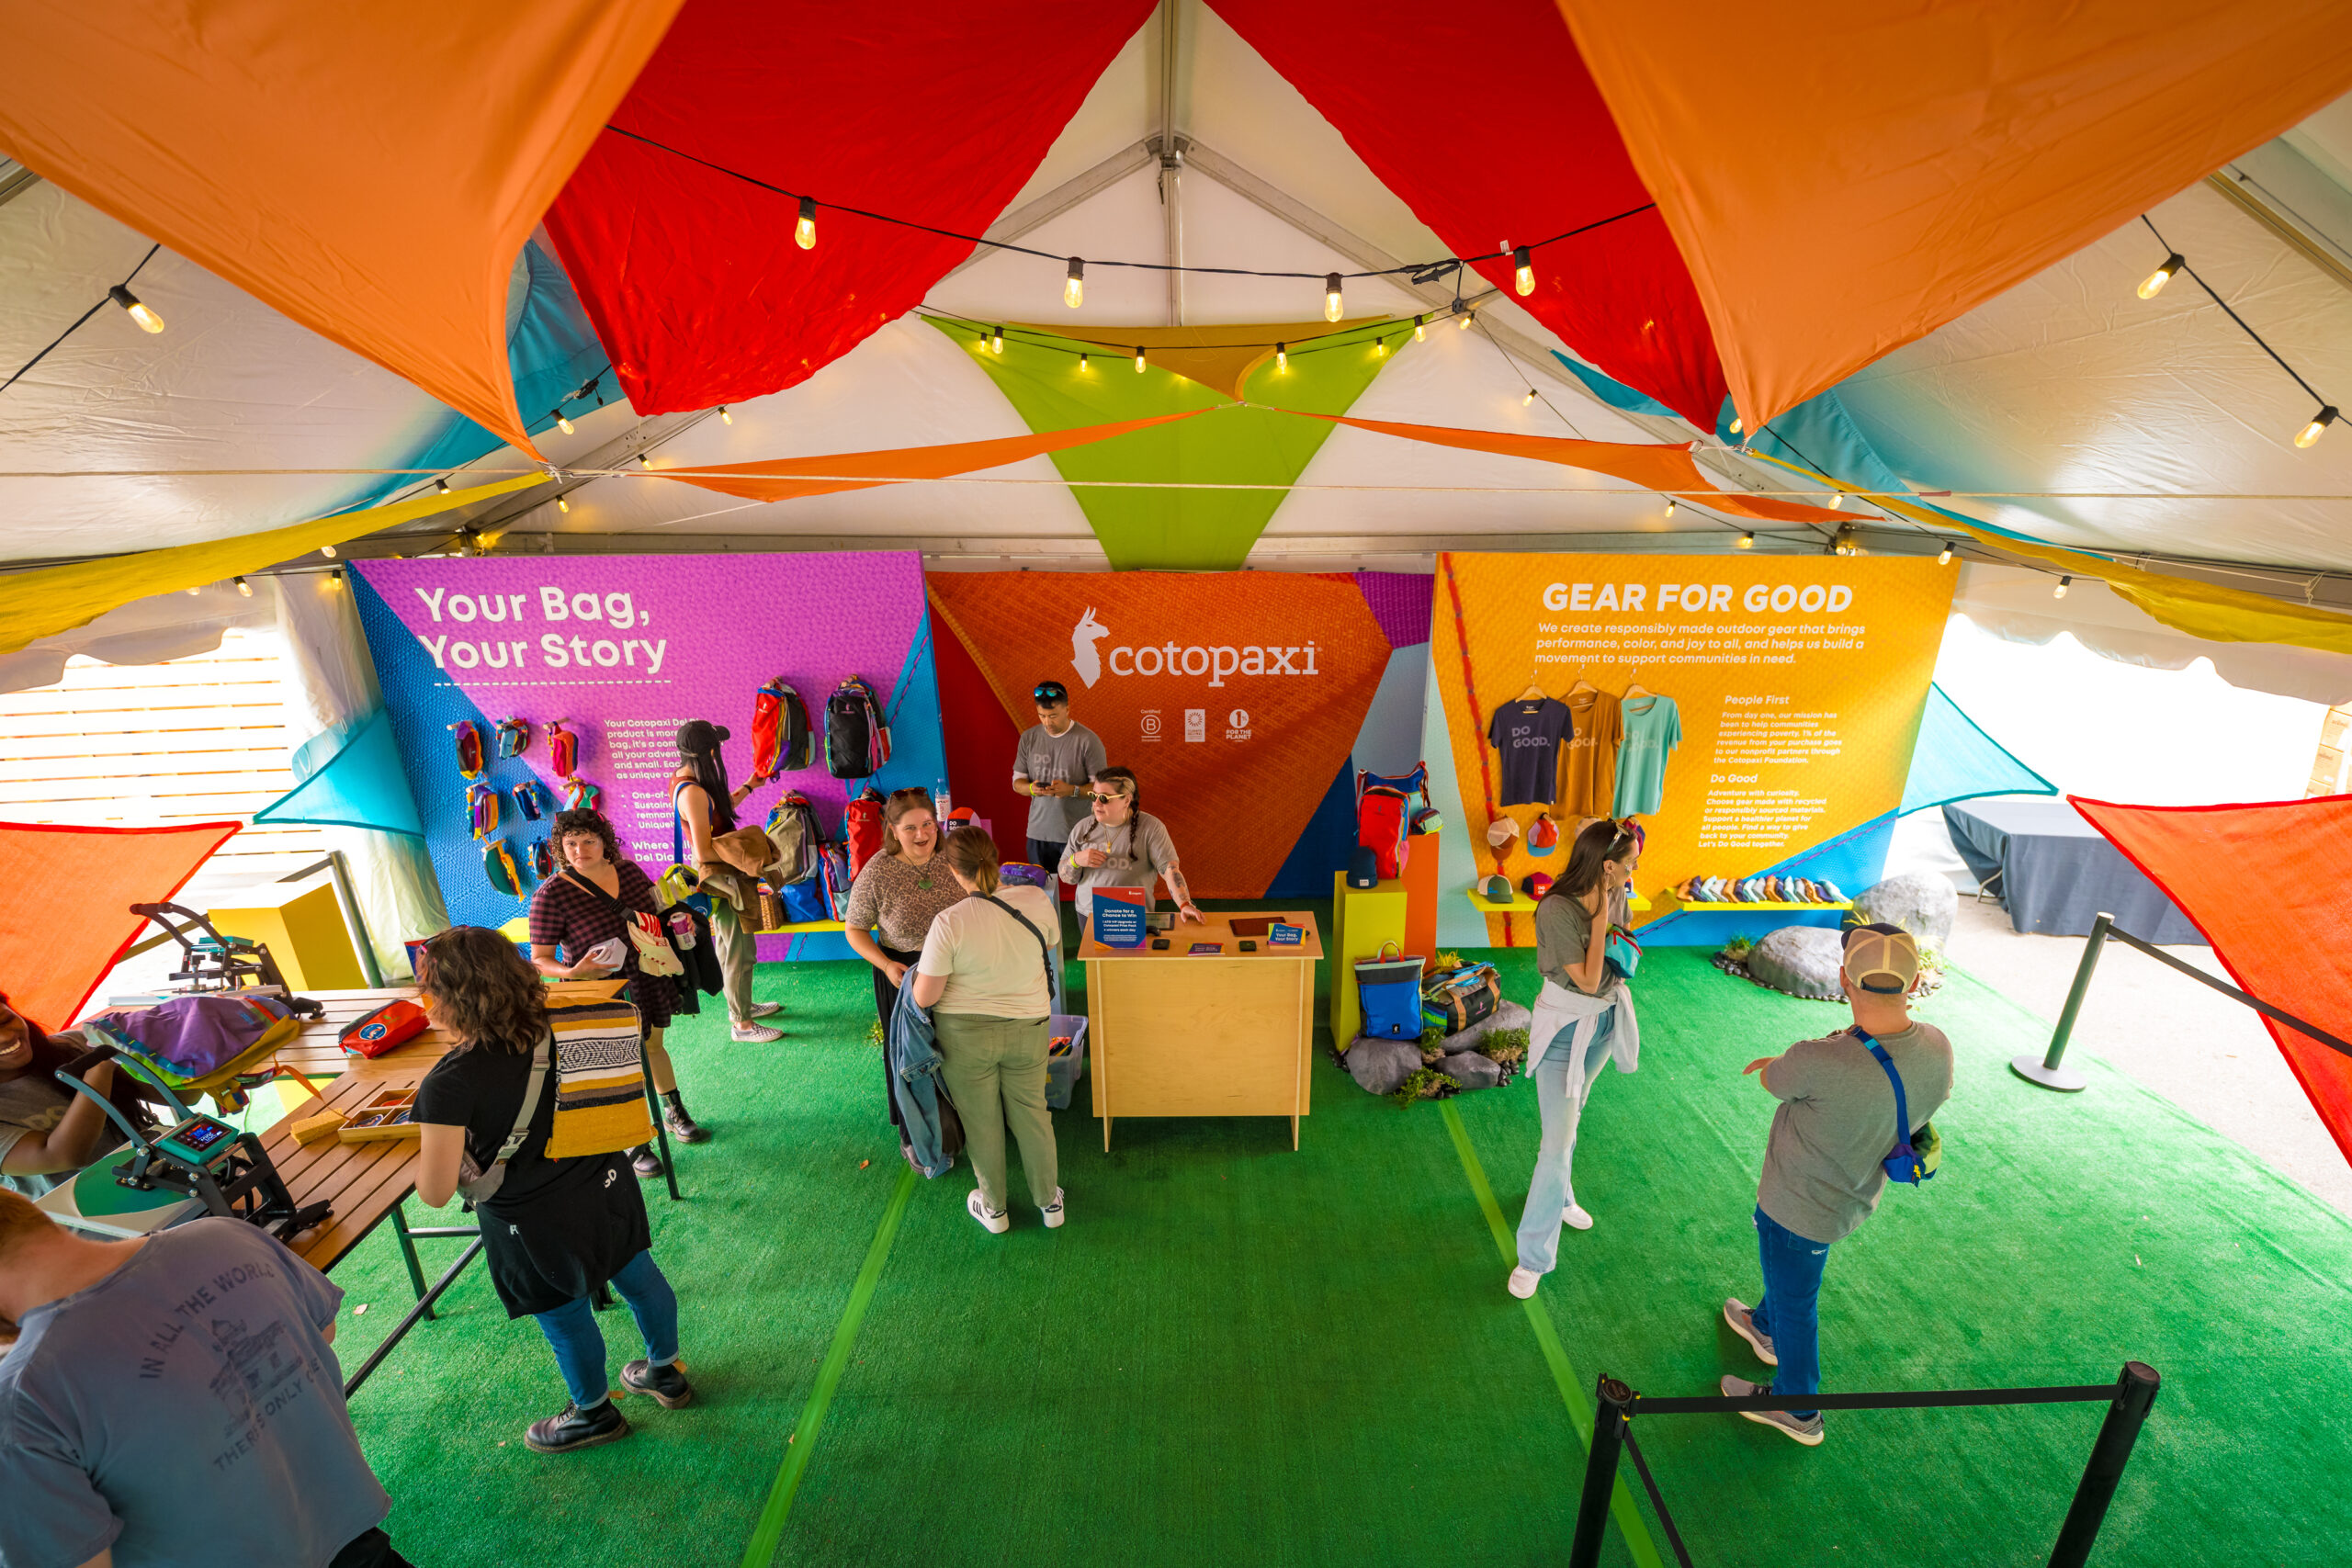 A birds-eye view of the inside of the Cotopaxi tent.